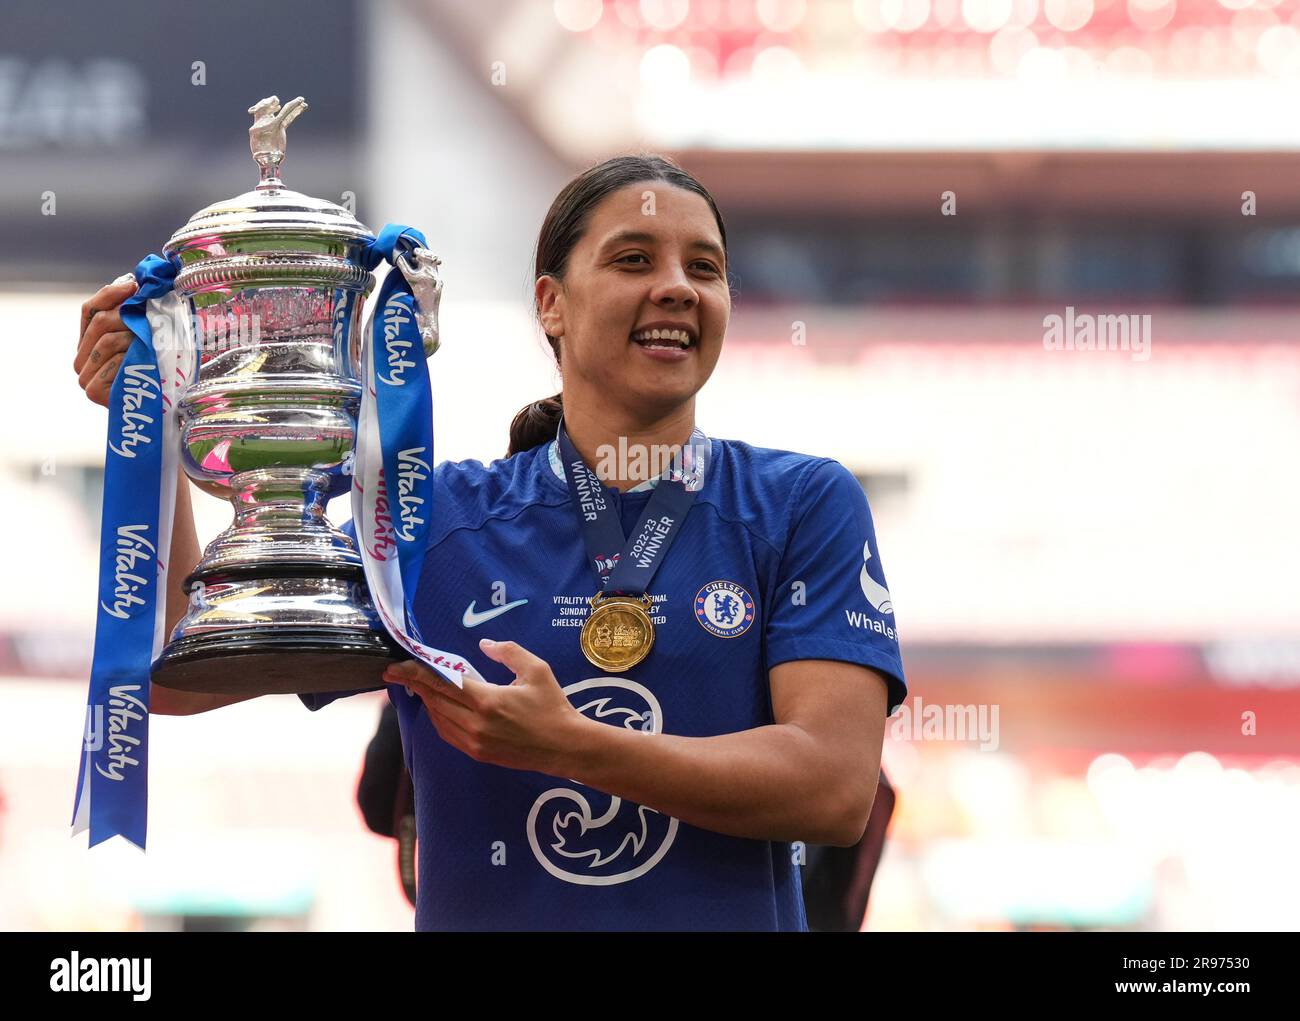 Sam Kerr of Chelsea Women poses with the winning trophy during the Women's FA Cup Final match between Chelsea Women and Manchester United Women at Wem Stock Photo